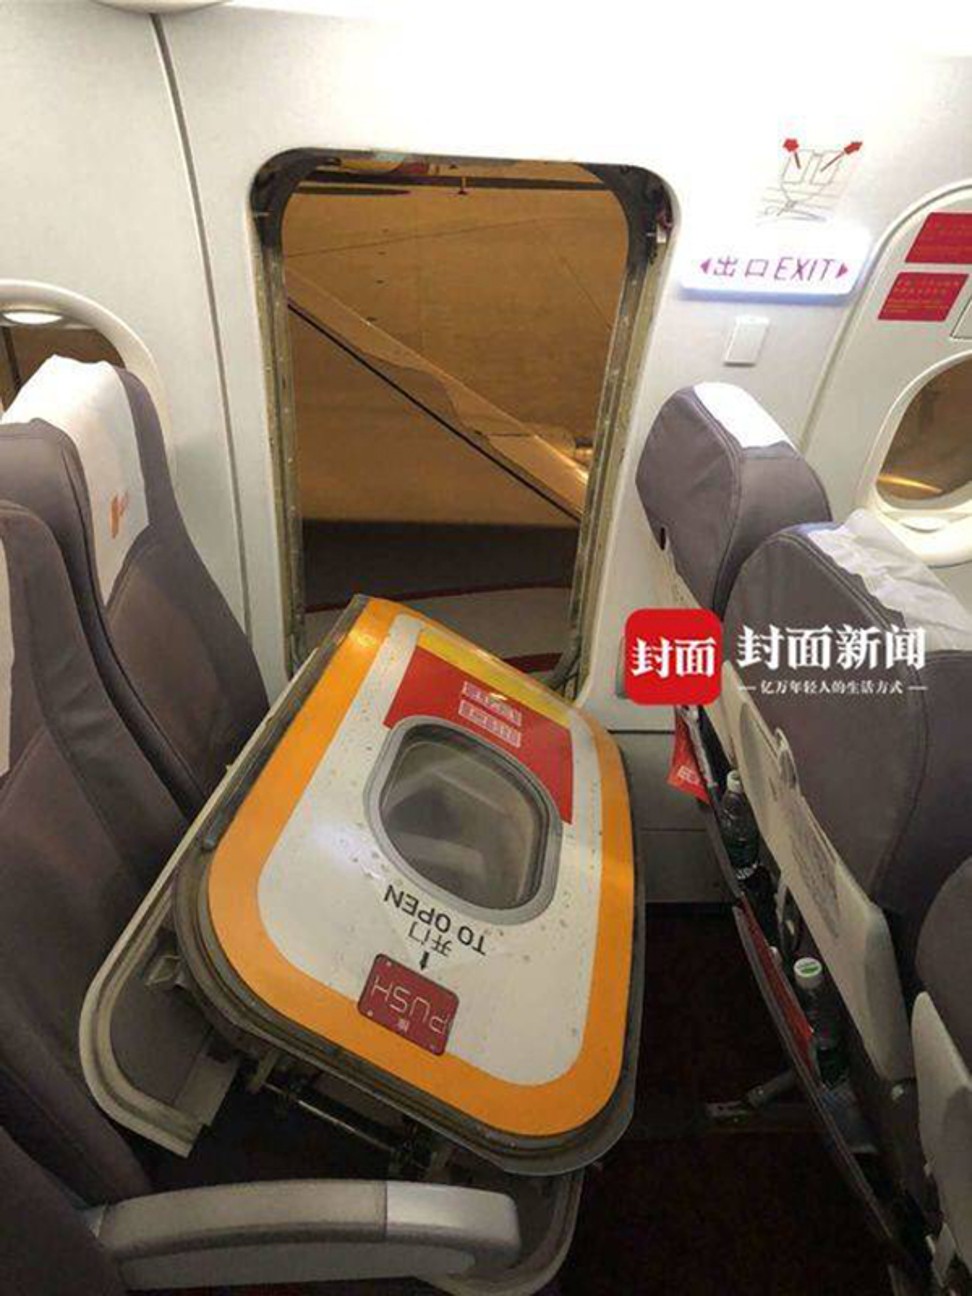 The passenger insisted that he thought he was opening a window. Photo: Thepaper.cn